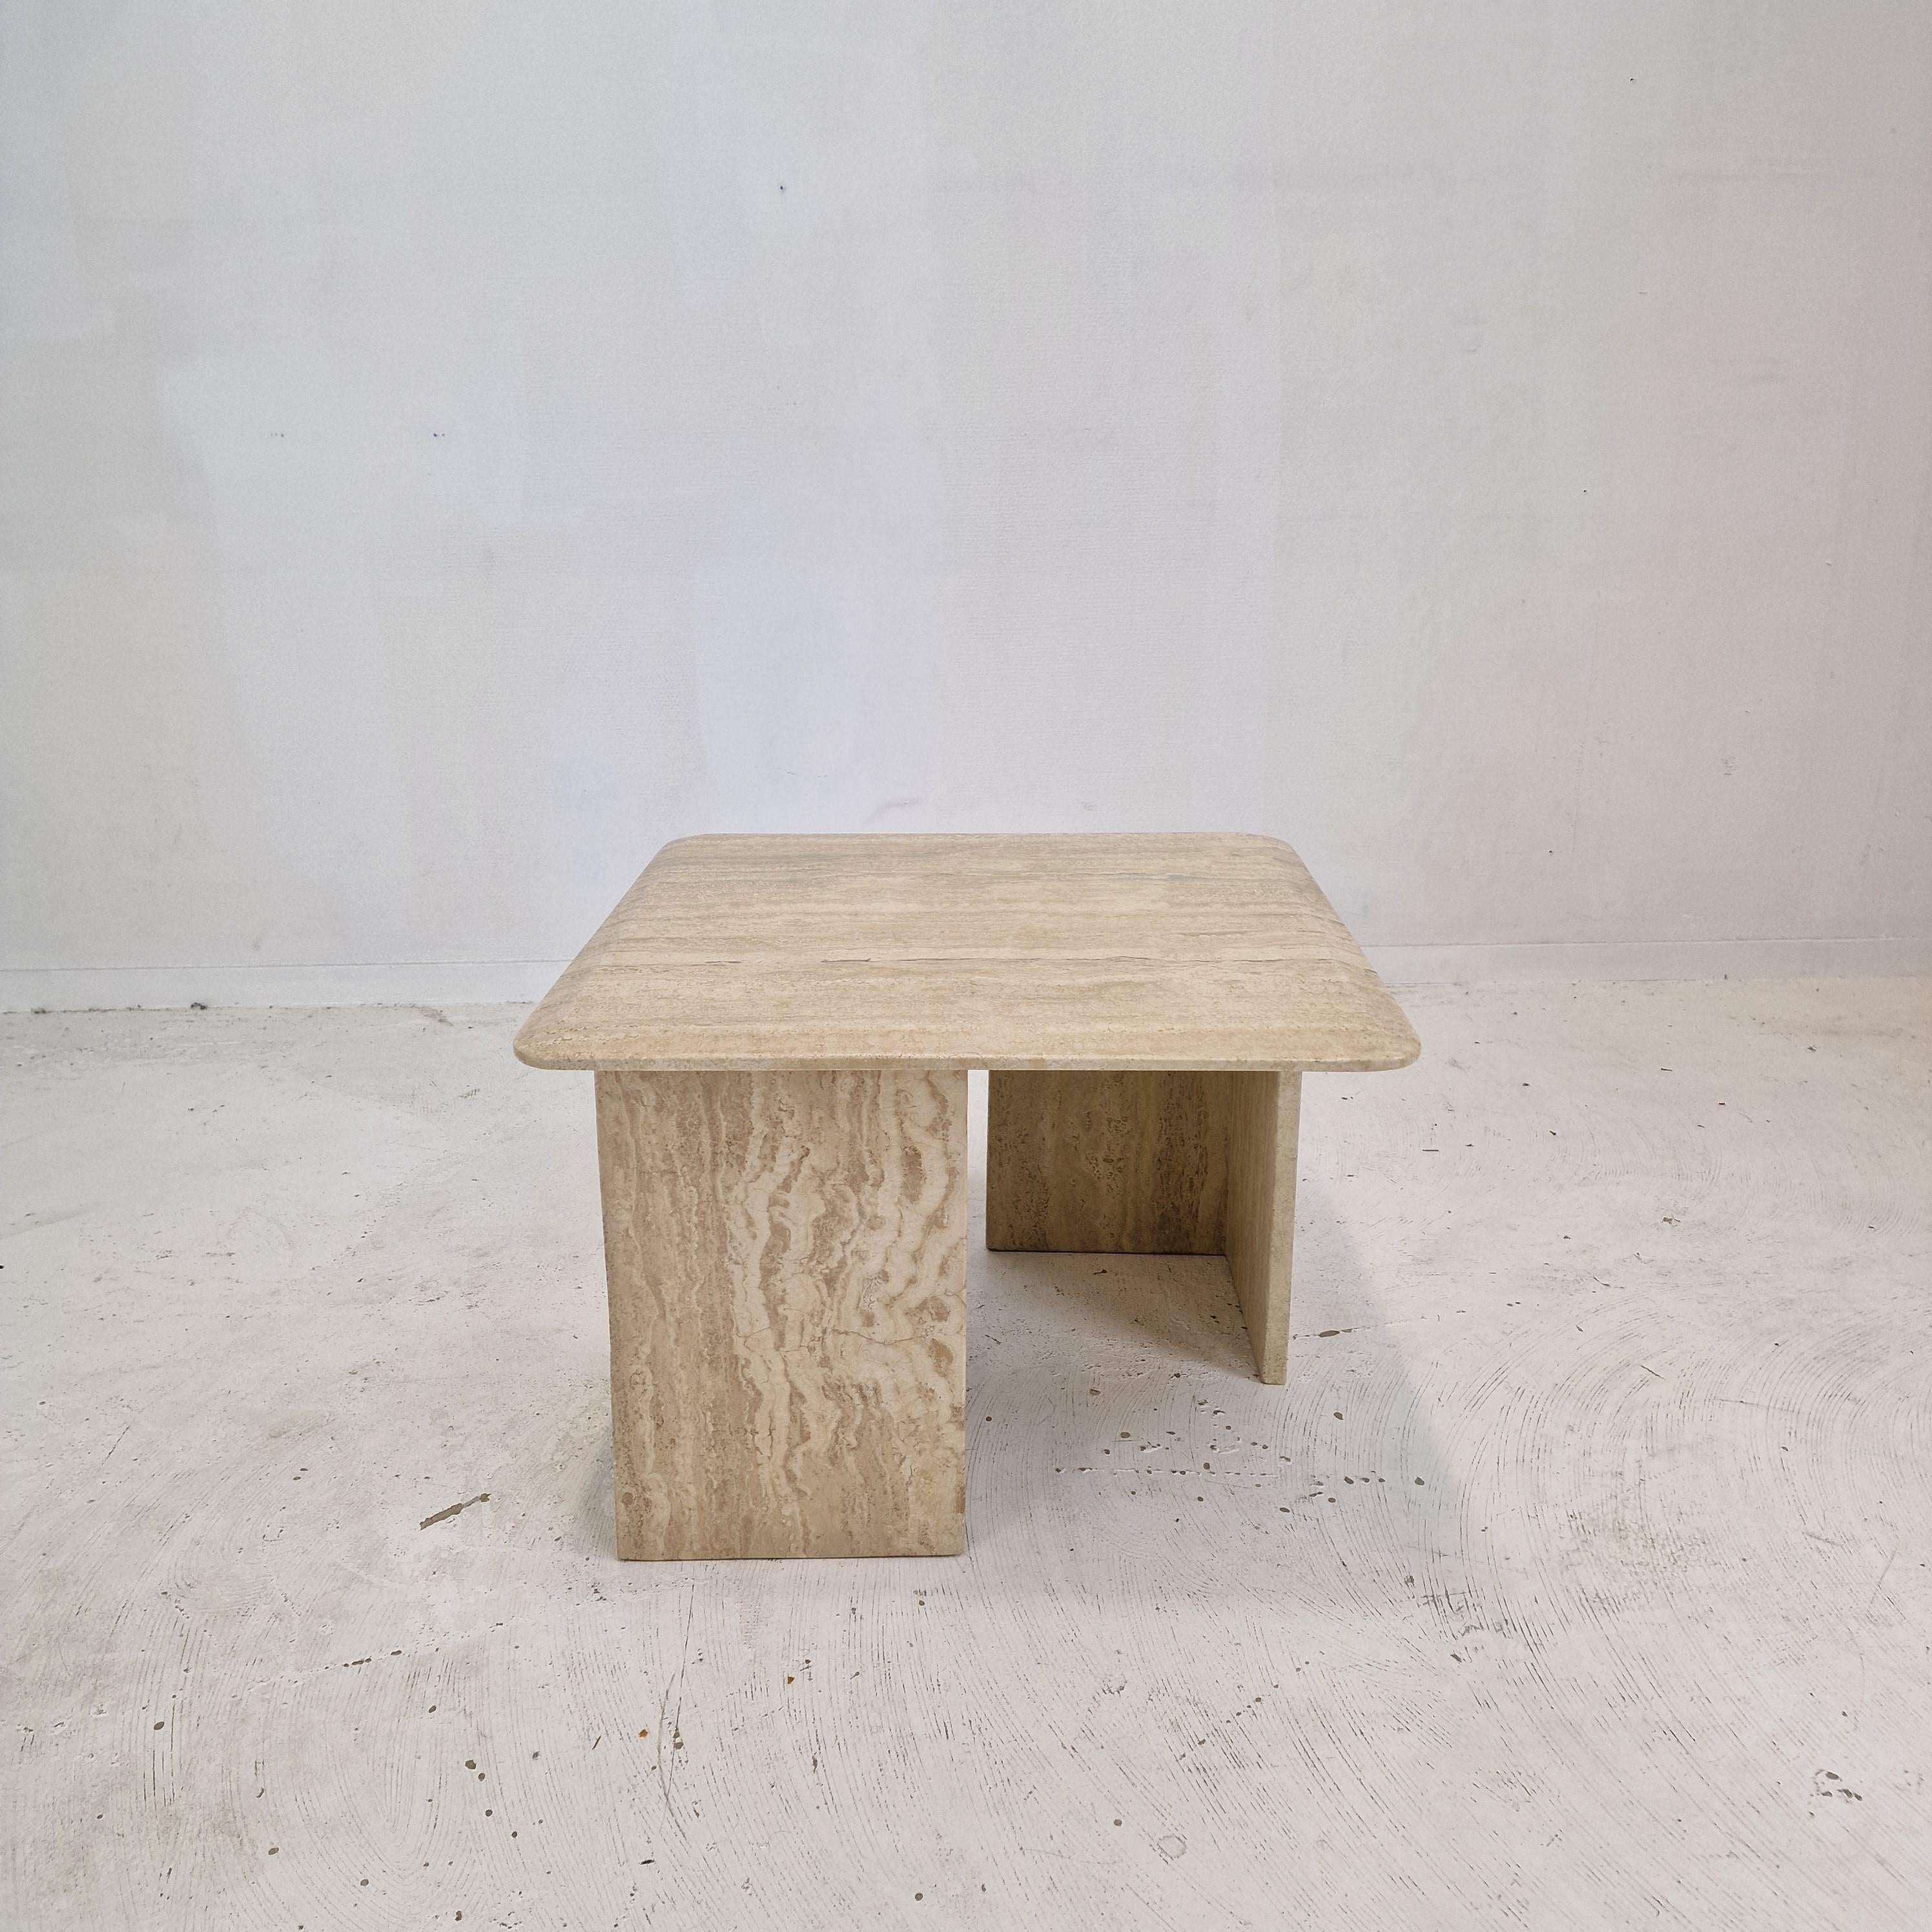 Very elegant Italian coffee table handcrafted out of travertine.

The beautiful square top is rounded on the edge. 
It is made of beautiful travertine.

The base is made of two separate pieces, it is possible to vary the position.

It has the